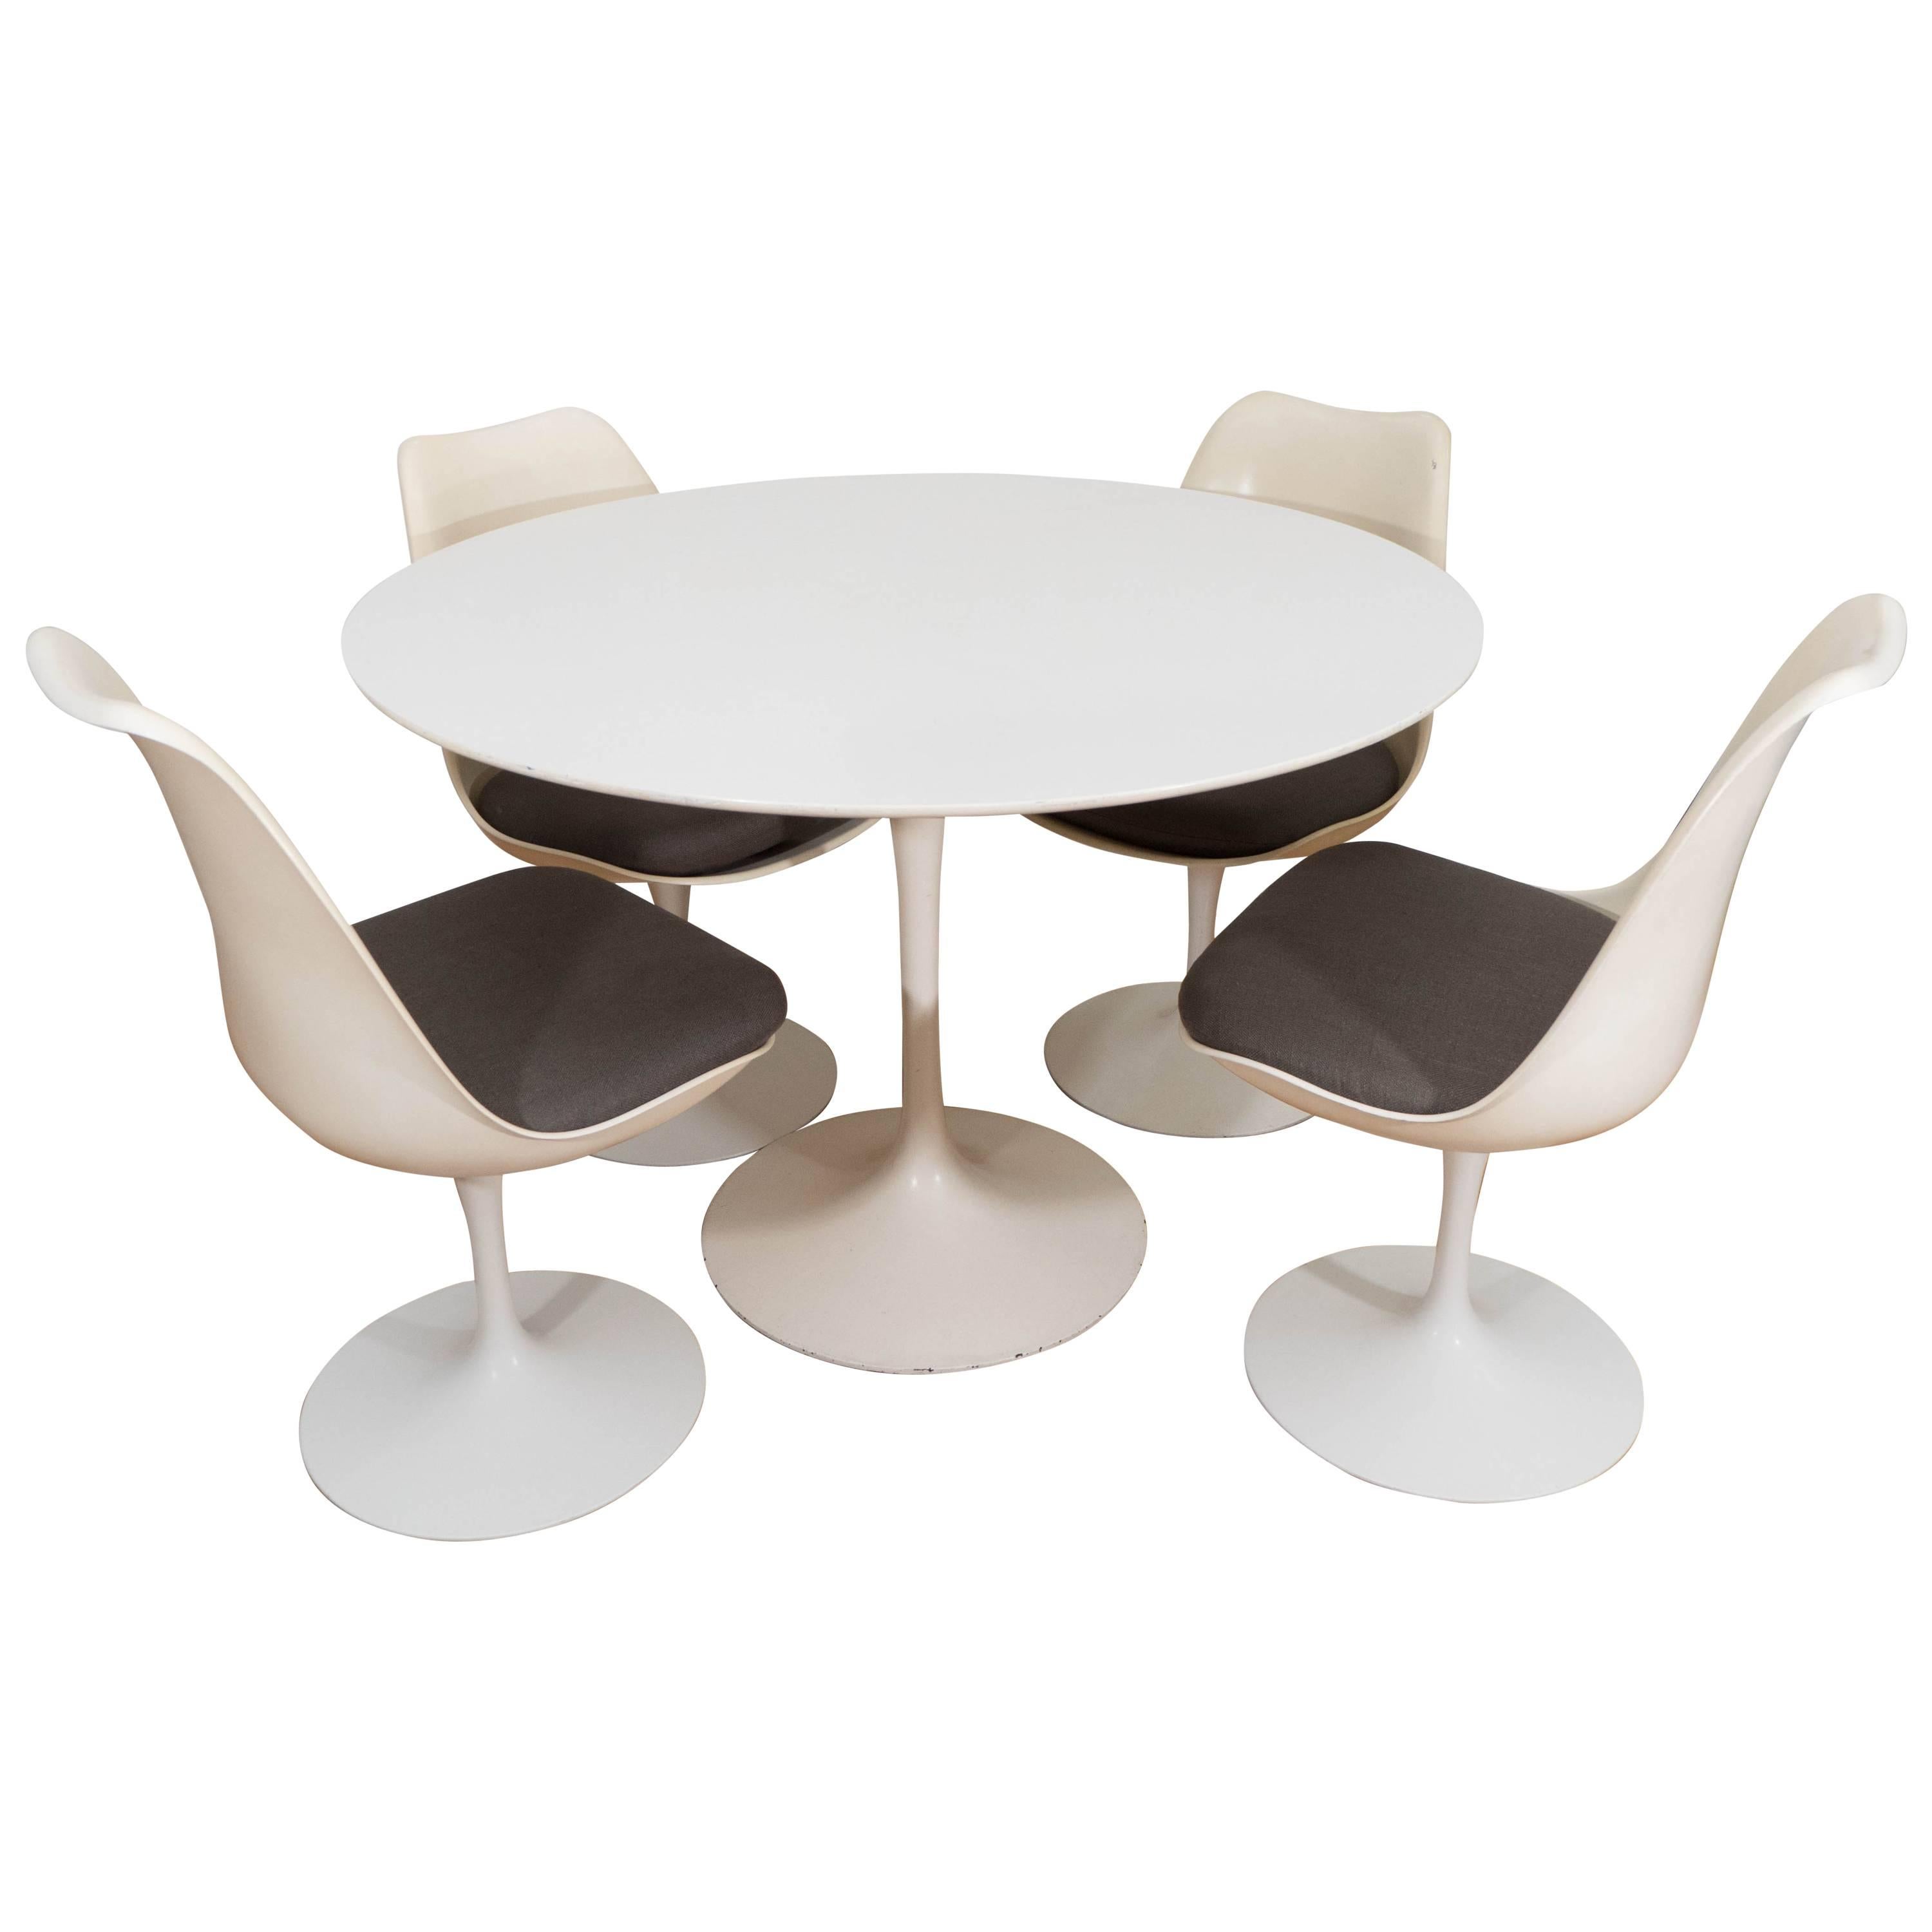 Eero Saarinen Set of Four Tulip Chairs and Table for Knoll